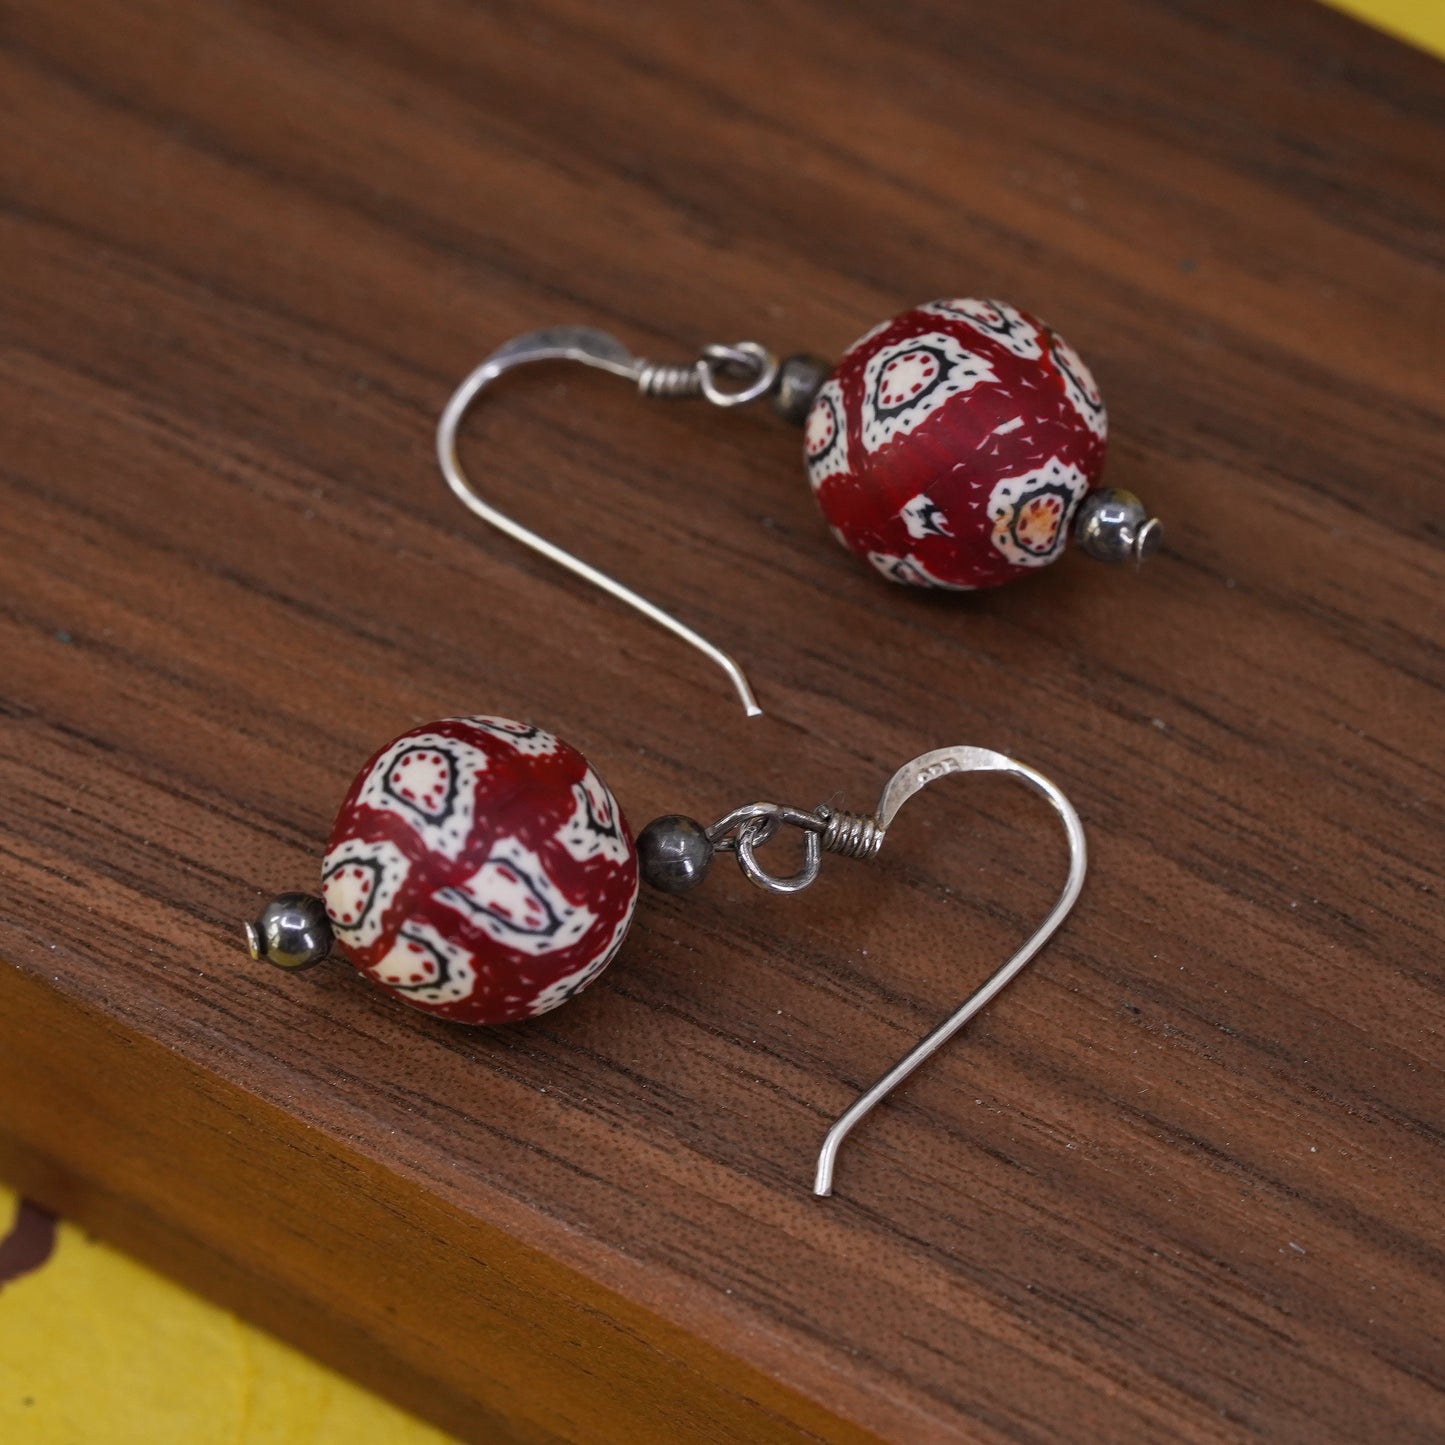 Vintage Sterling 925 silver handmade earrings with red textured beads